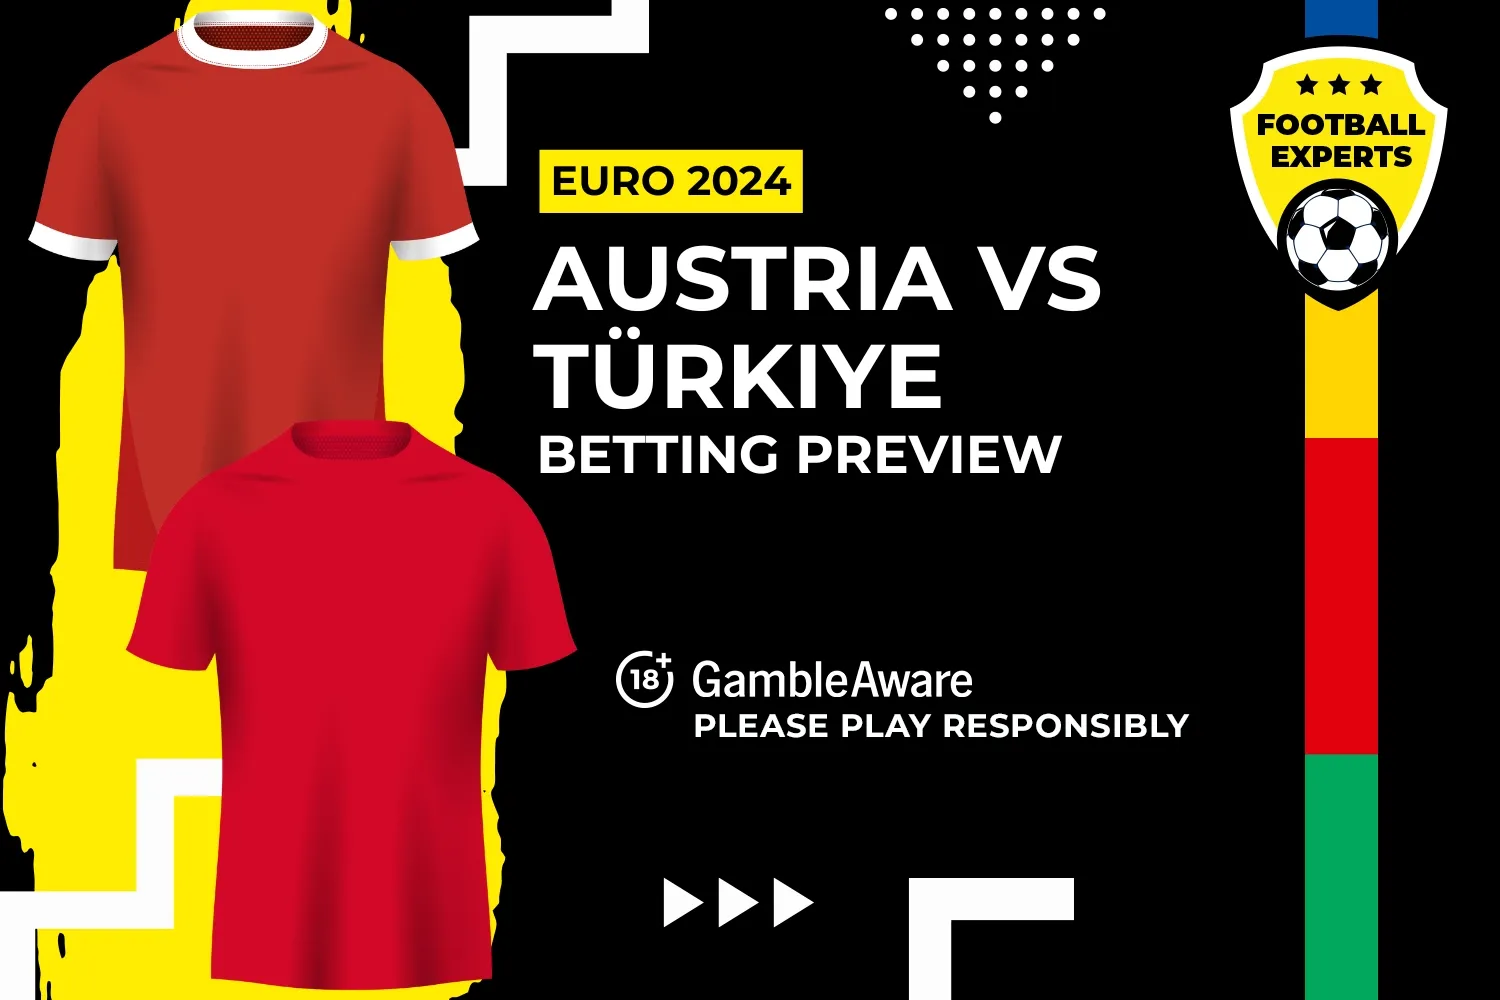 Austria vs Turkey predictions, odds and betting tips